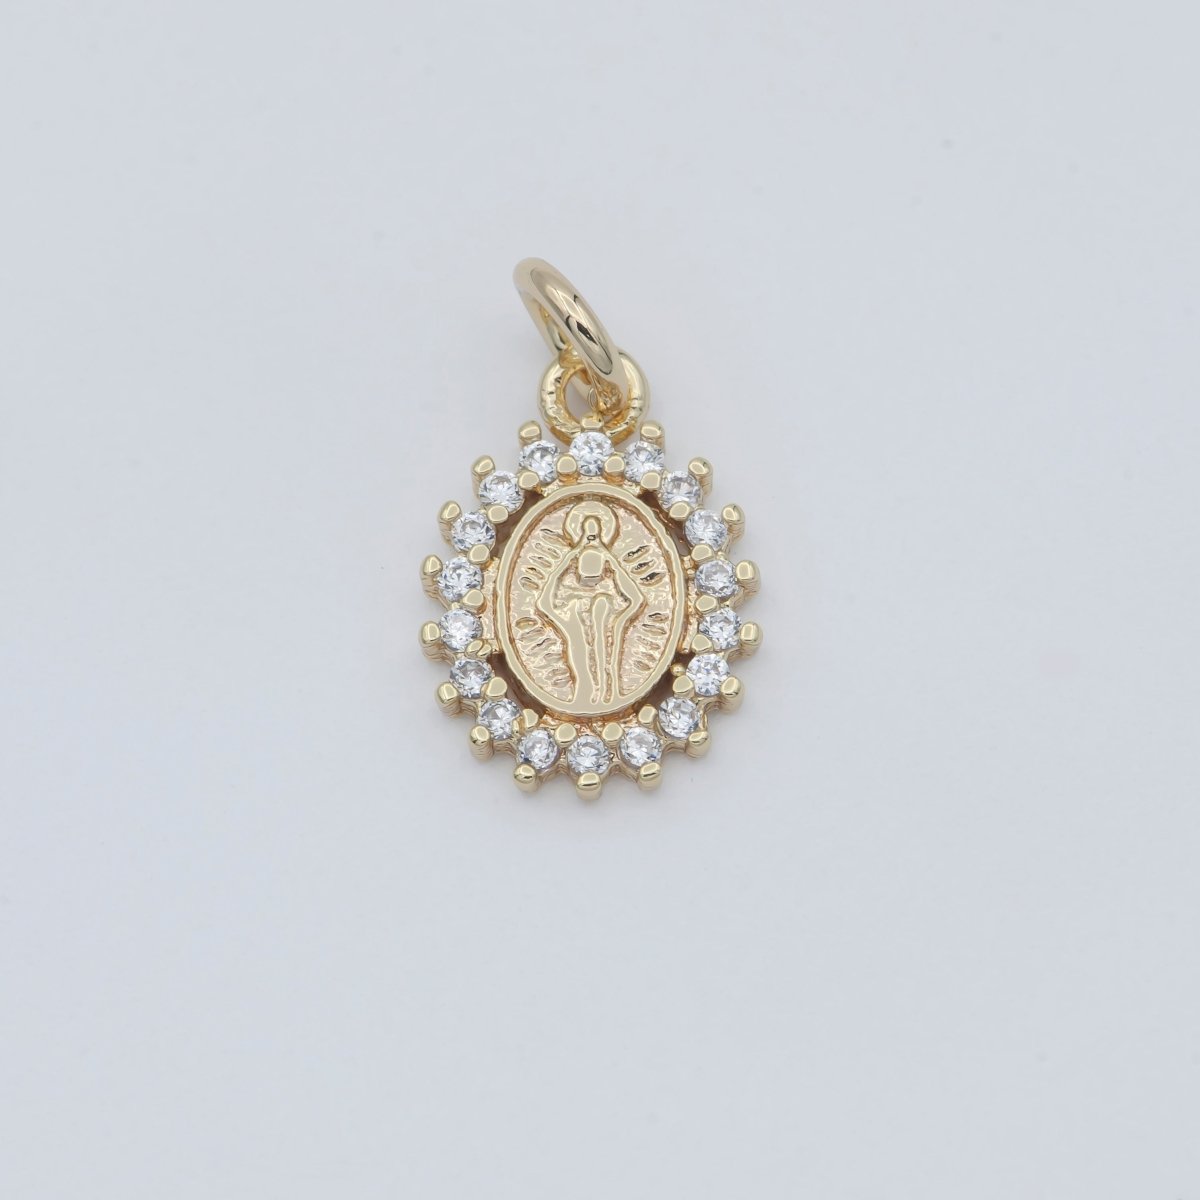 18K Gold Filled Delicate Virgin Mother Mary Religious Charm Pendant, 17X10mm Cubic Zirconia C-005 - DLUXCA